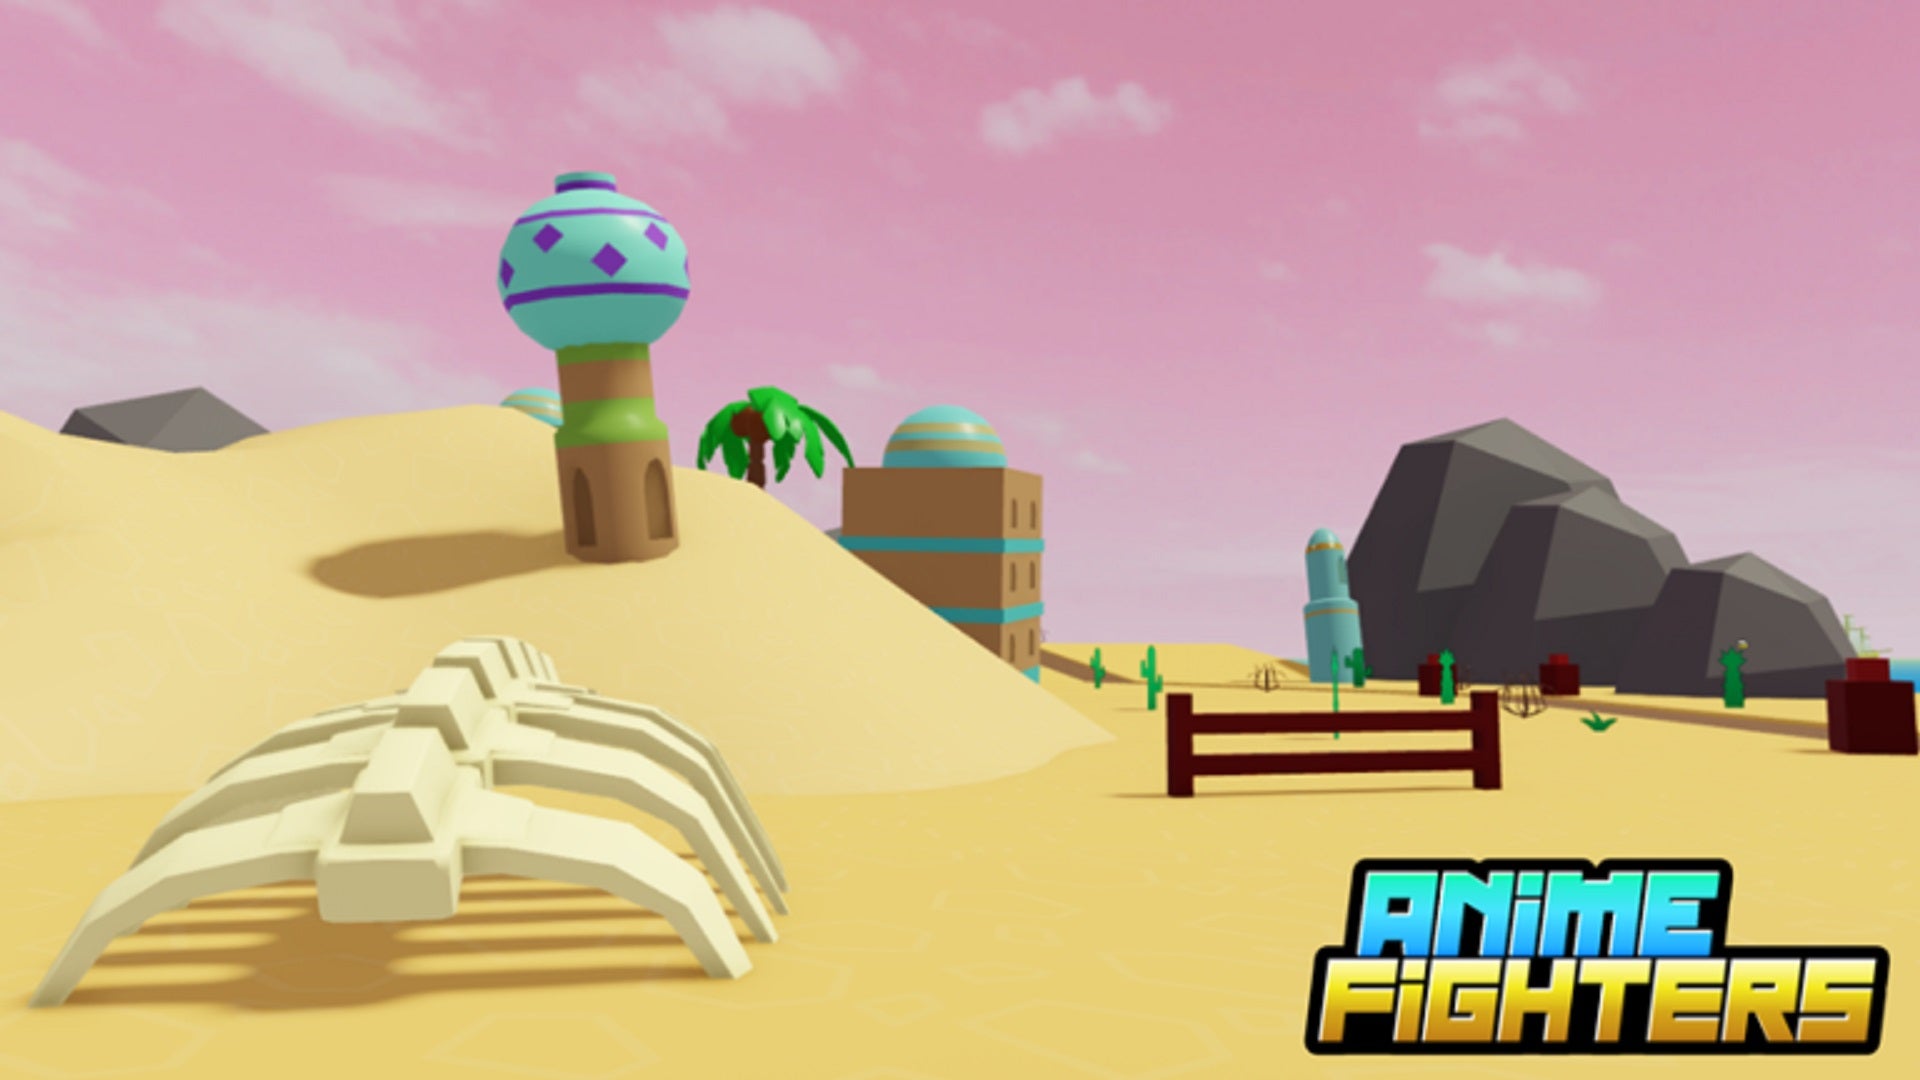 One of the locations from Anime Fighters Simulator: a desert biome with the ribcage of a giant animal in the foreground, and some large rocks and sci-fi looking buildings in the background beneath a pink sky.